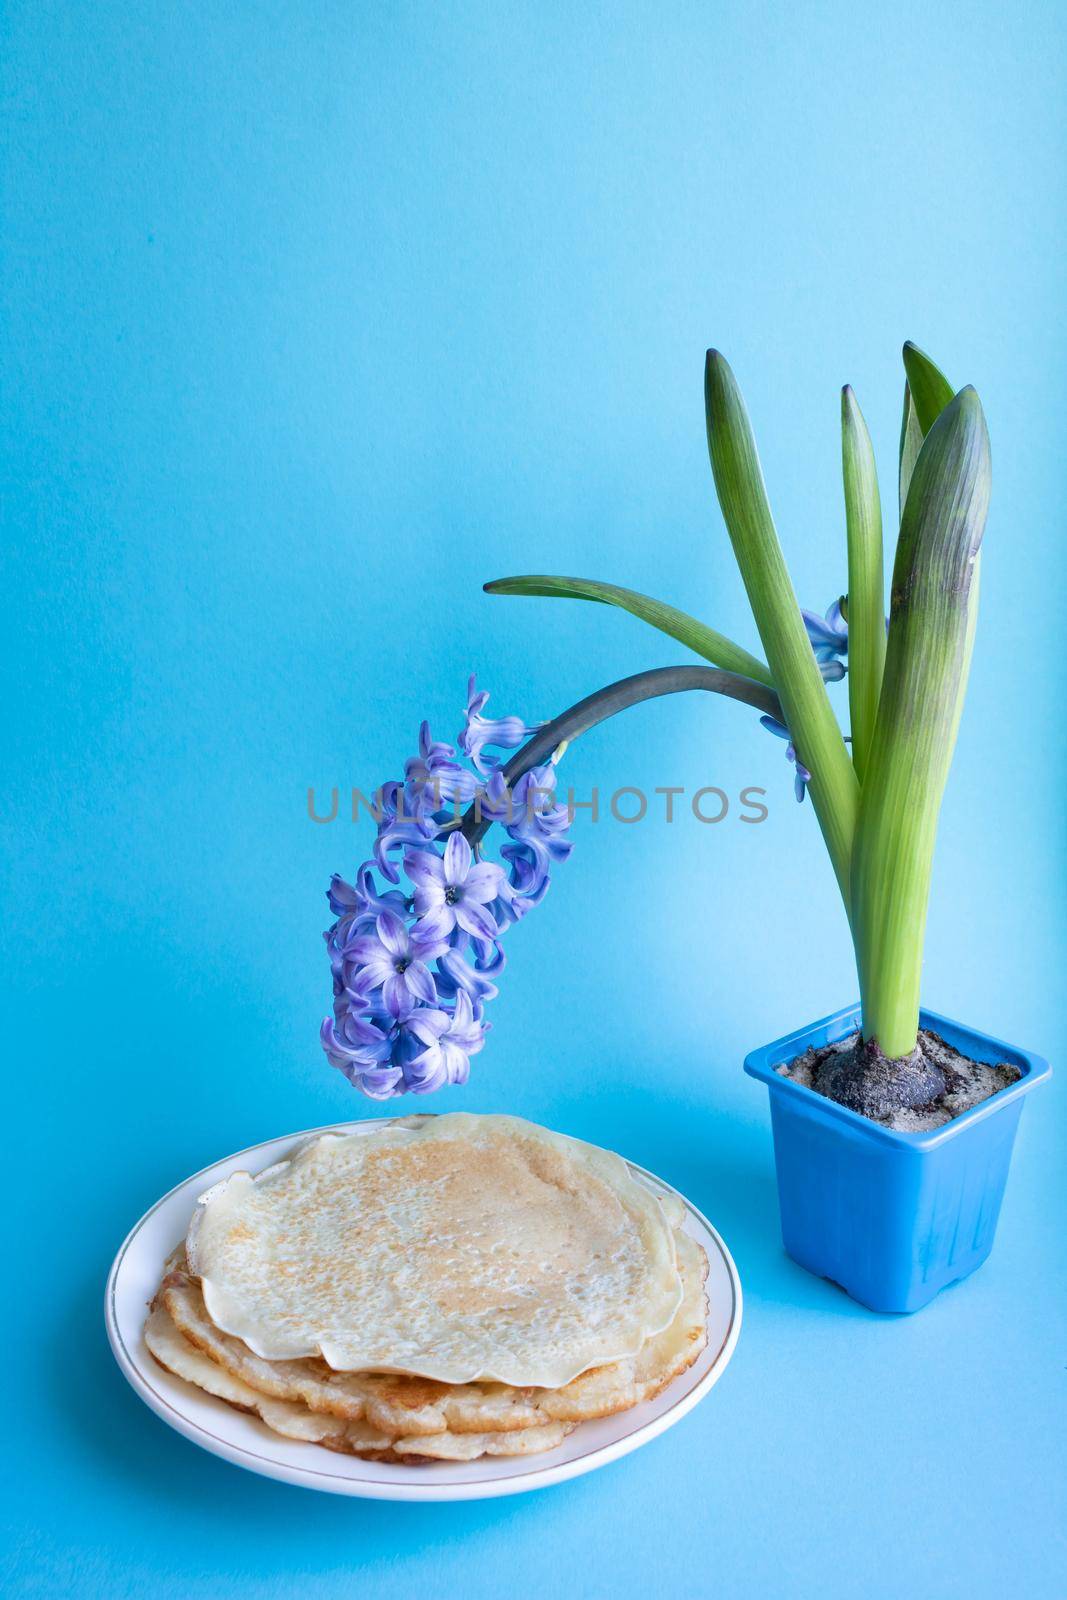 On a blue background, a lilac hyacinth flower in a pot, next to a plate of pancakes. by lapushka62